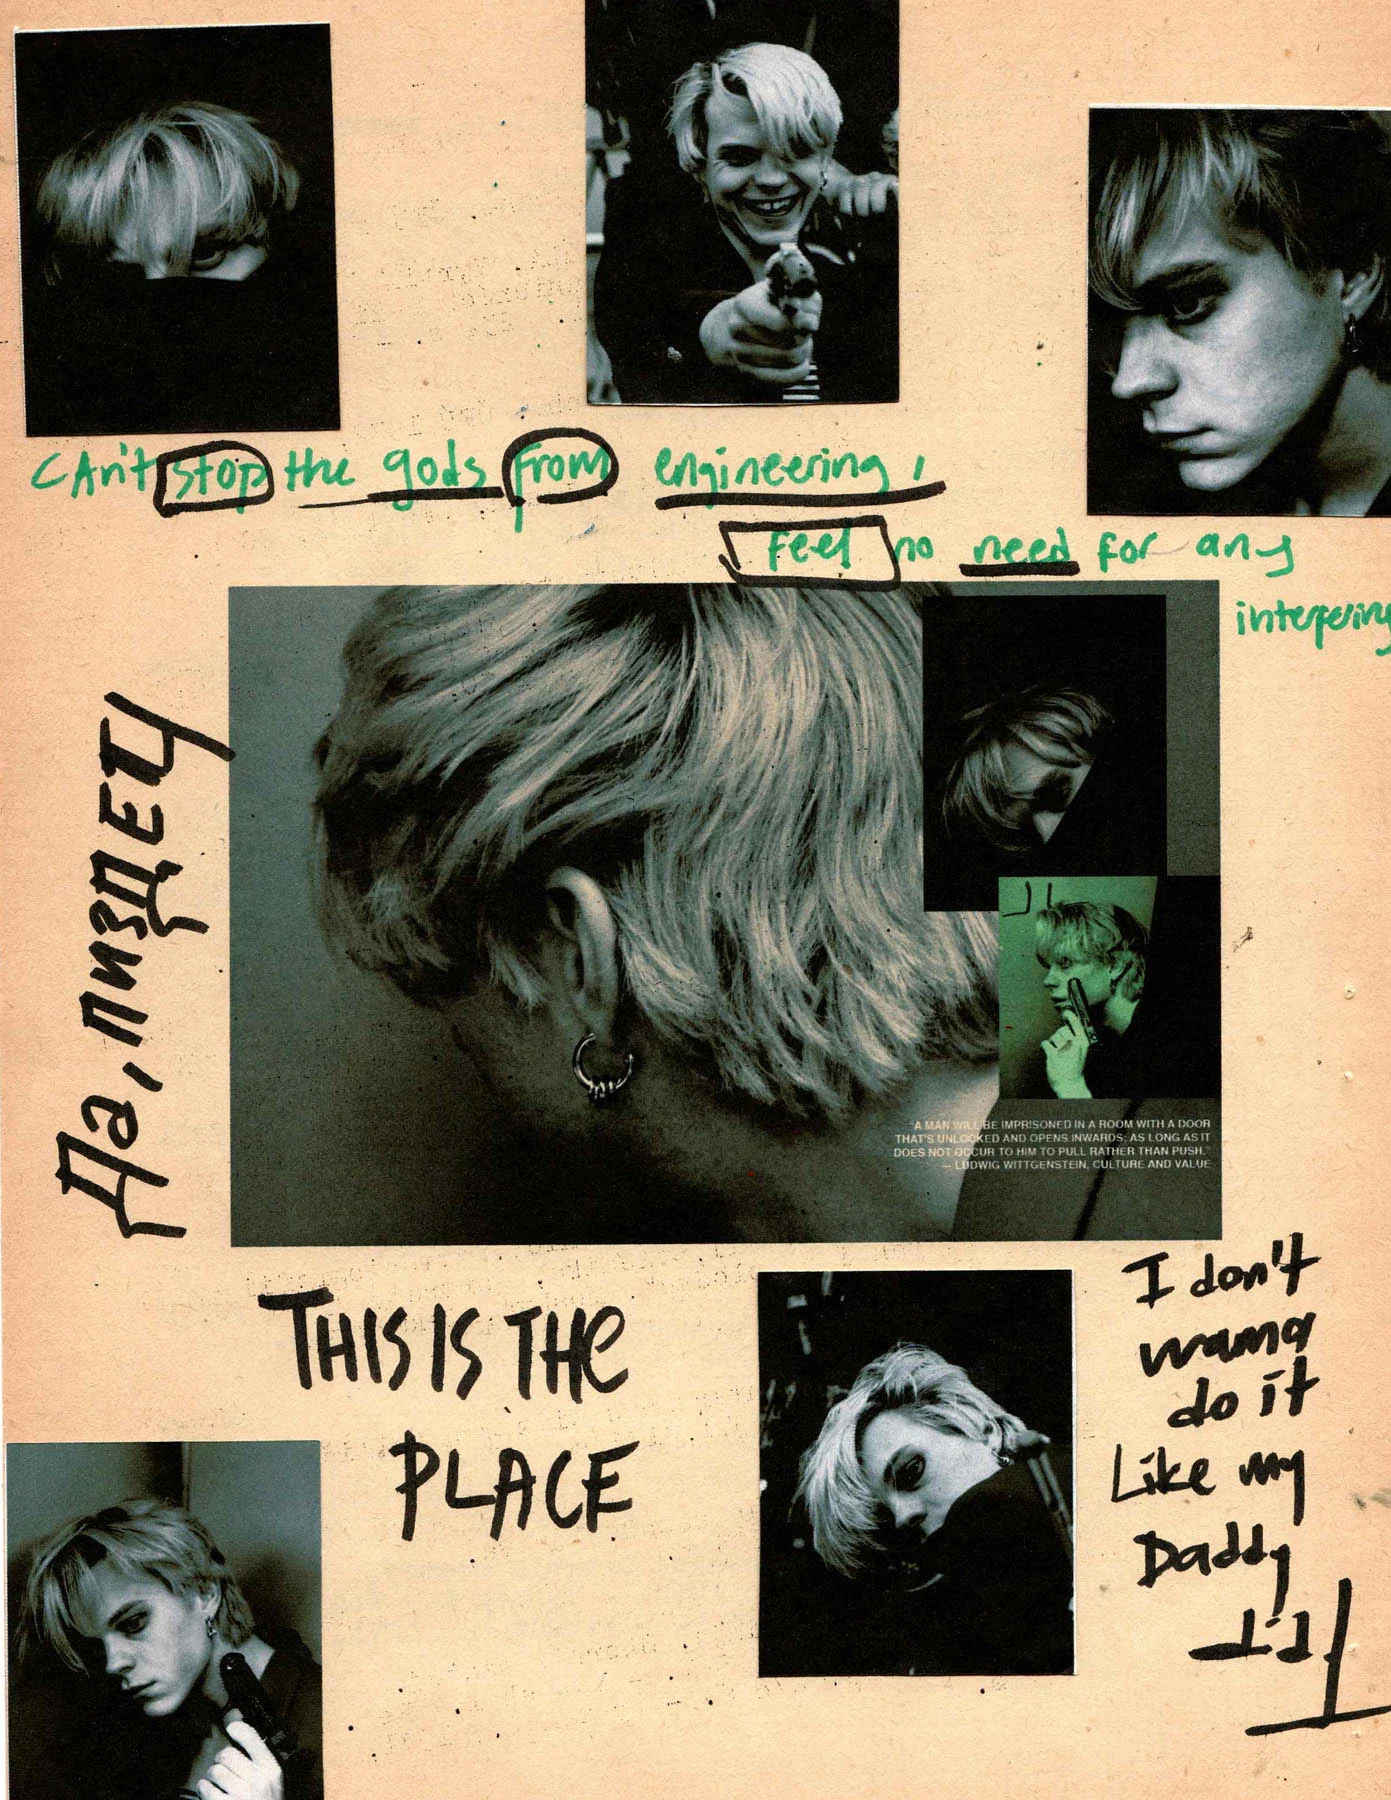 A mixed-media collage artwork featuring six different photos of a man. The artwork includes the text "This is the place" and "I don't wanna do it like my Daddy did it."